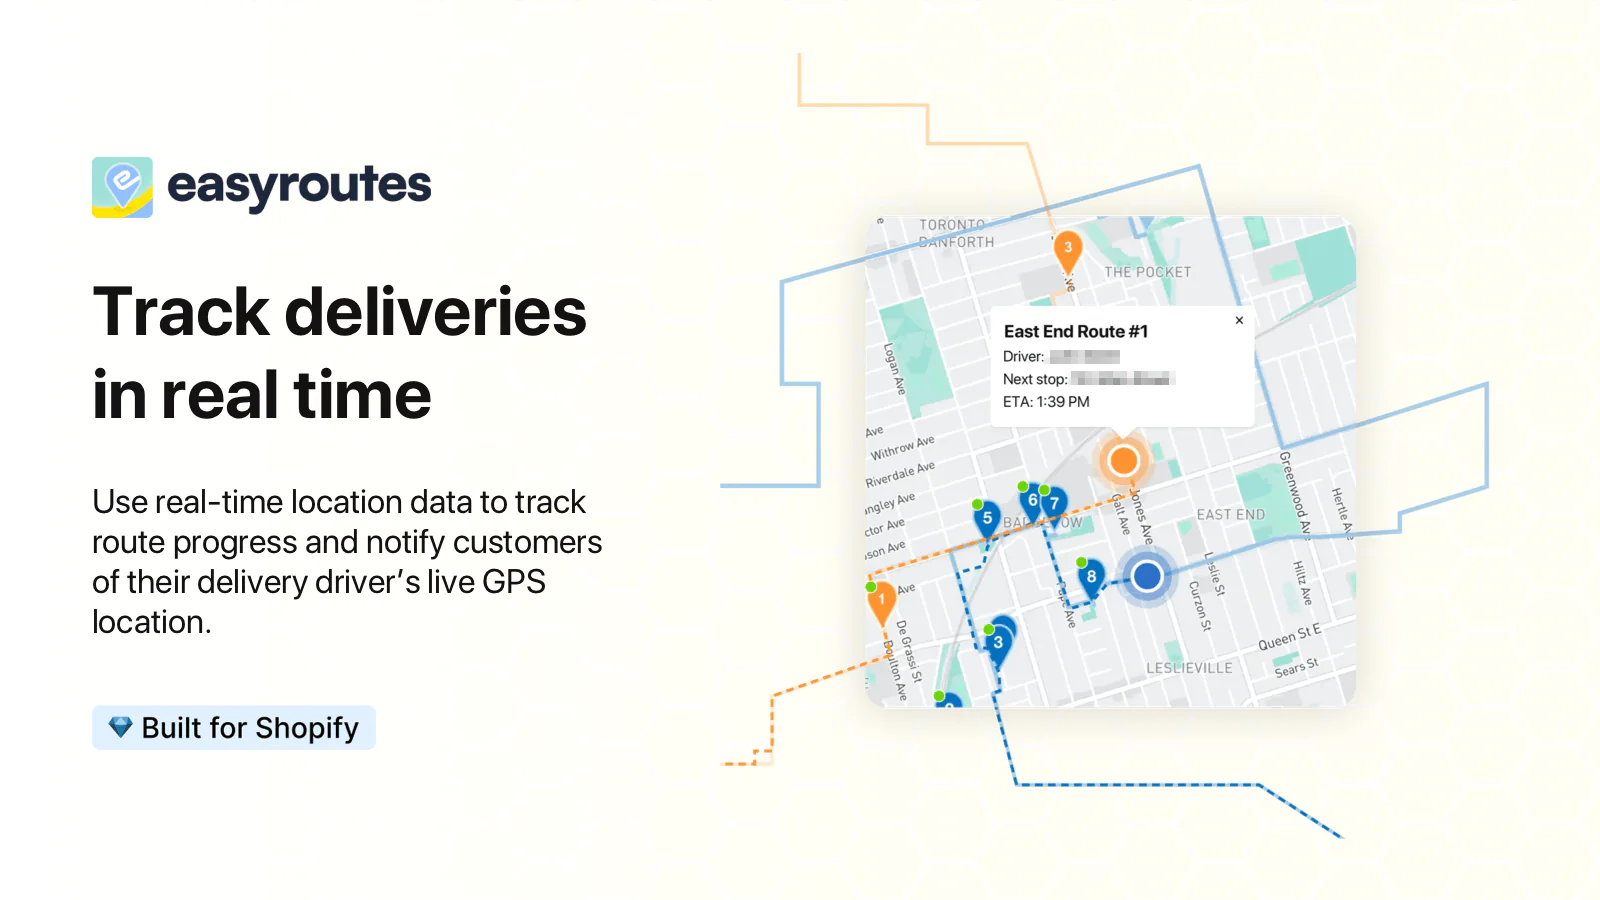 Track deliveries in real time